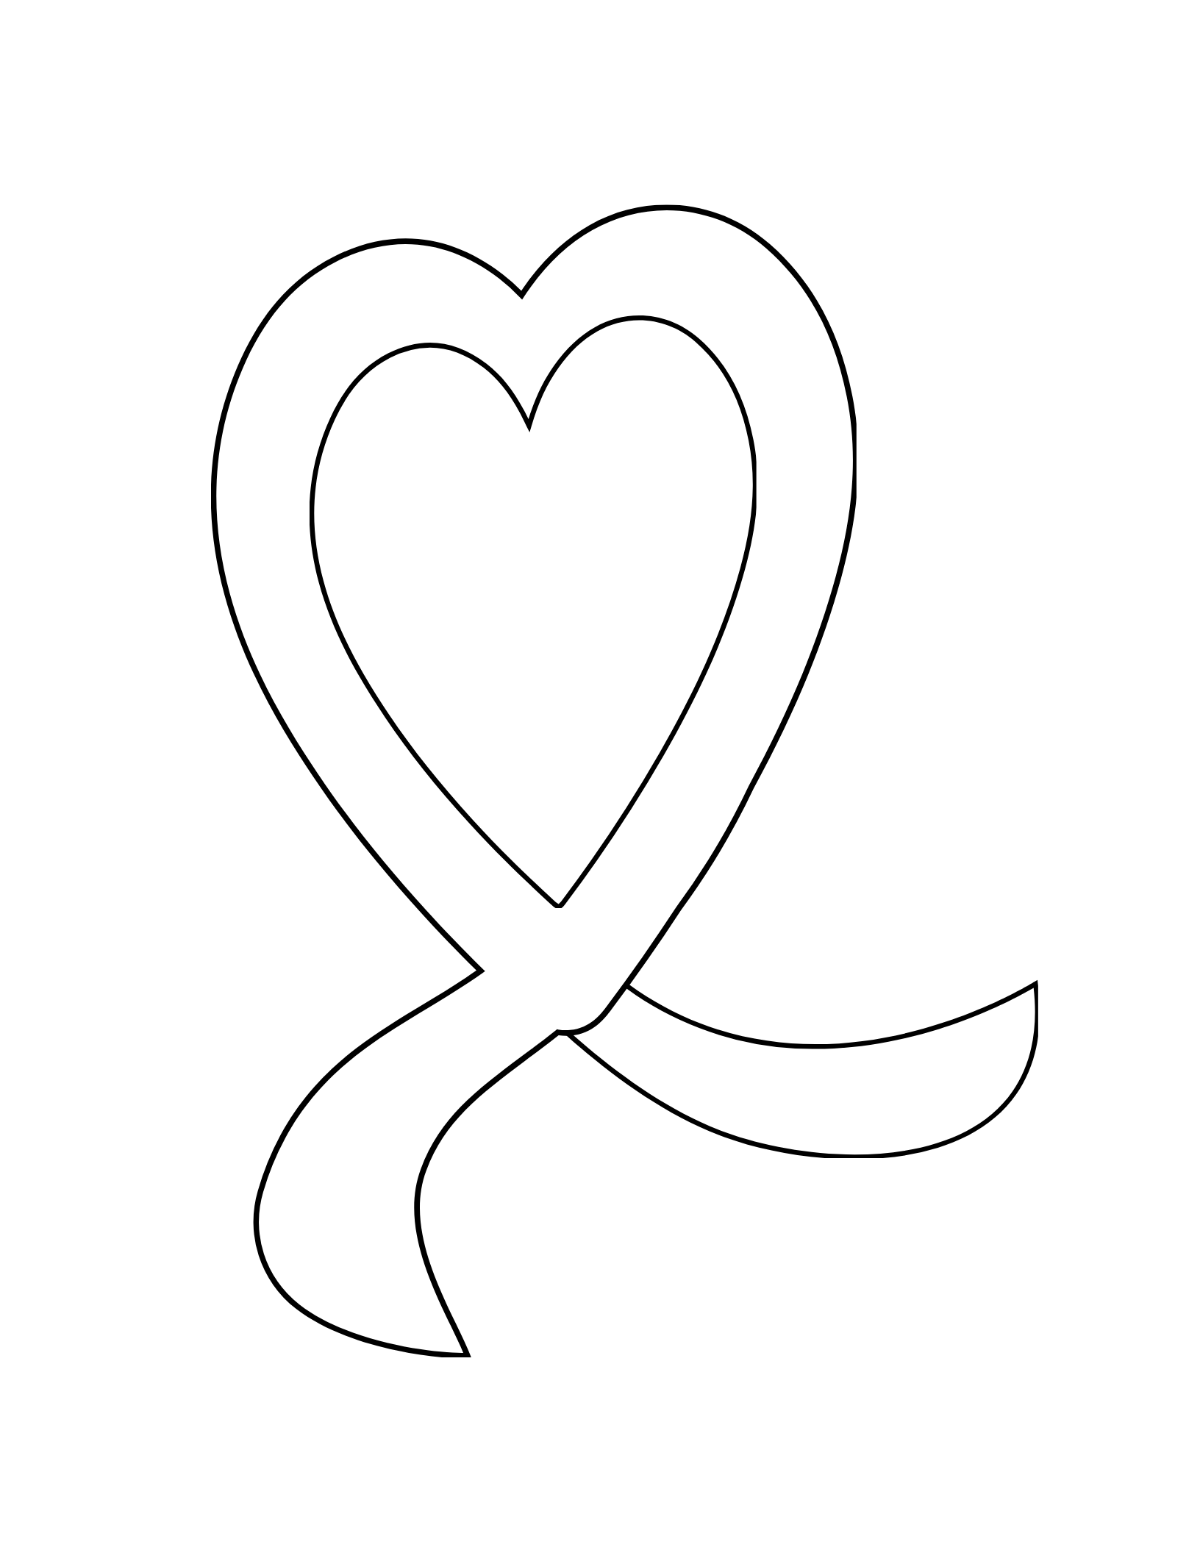 Heart Ribbon Coloring Page Template